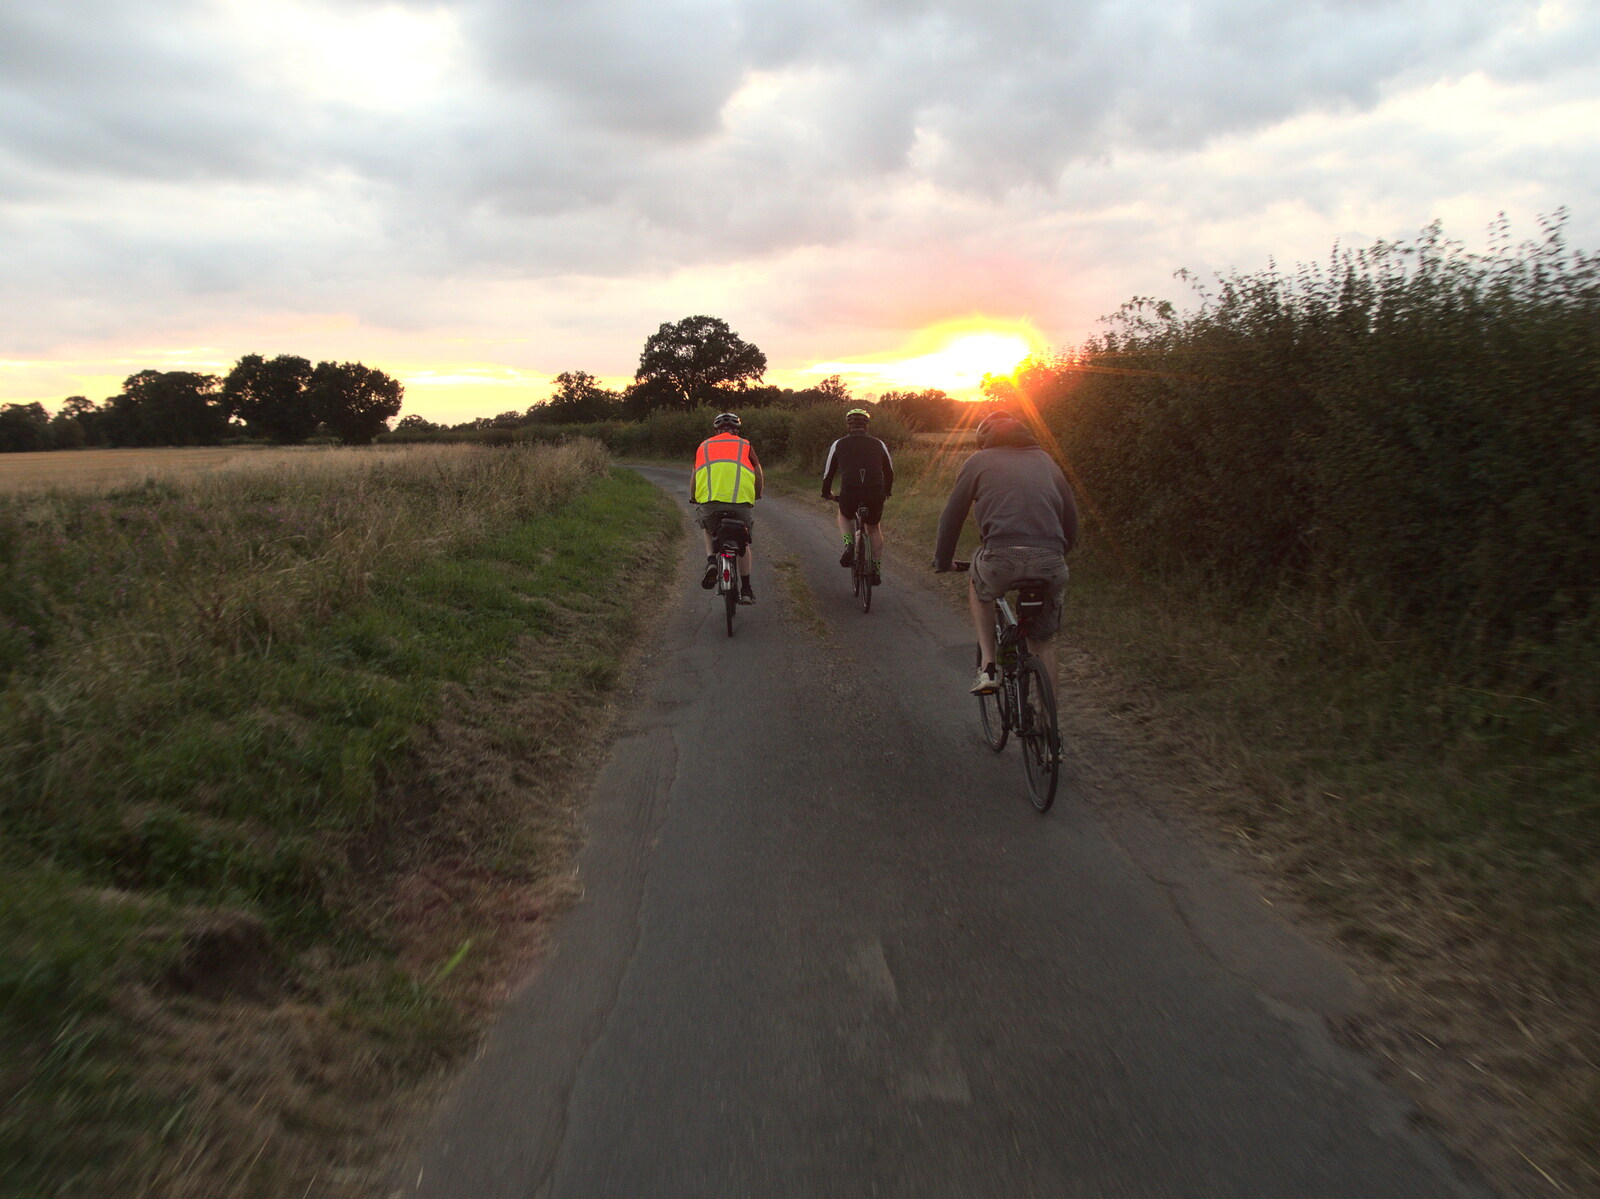 Setting sun on Back Lane from The BSCC at The Crown, Dickleburgh, Norfolk - 19th August 2021